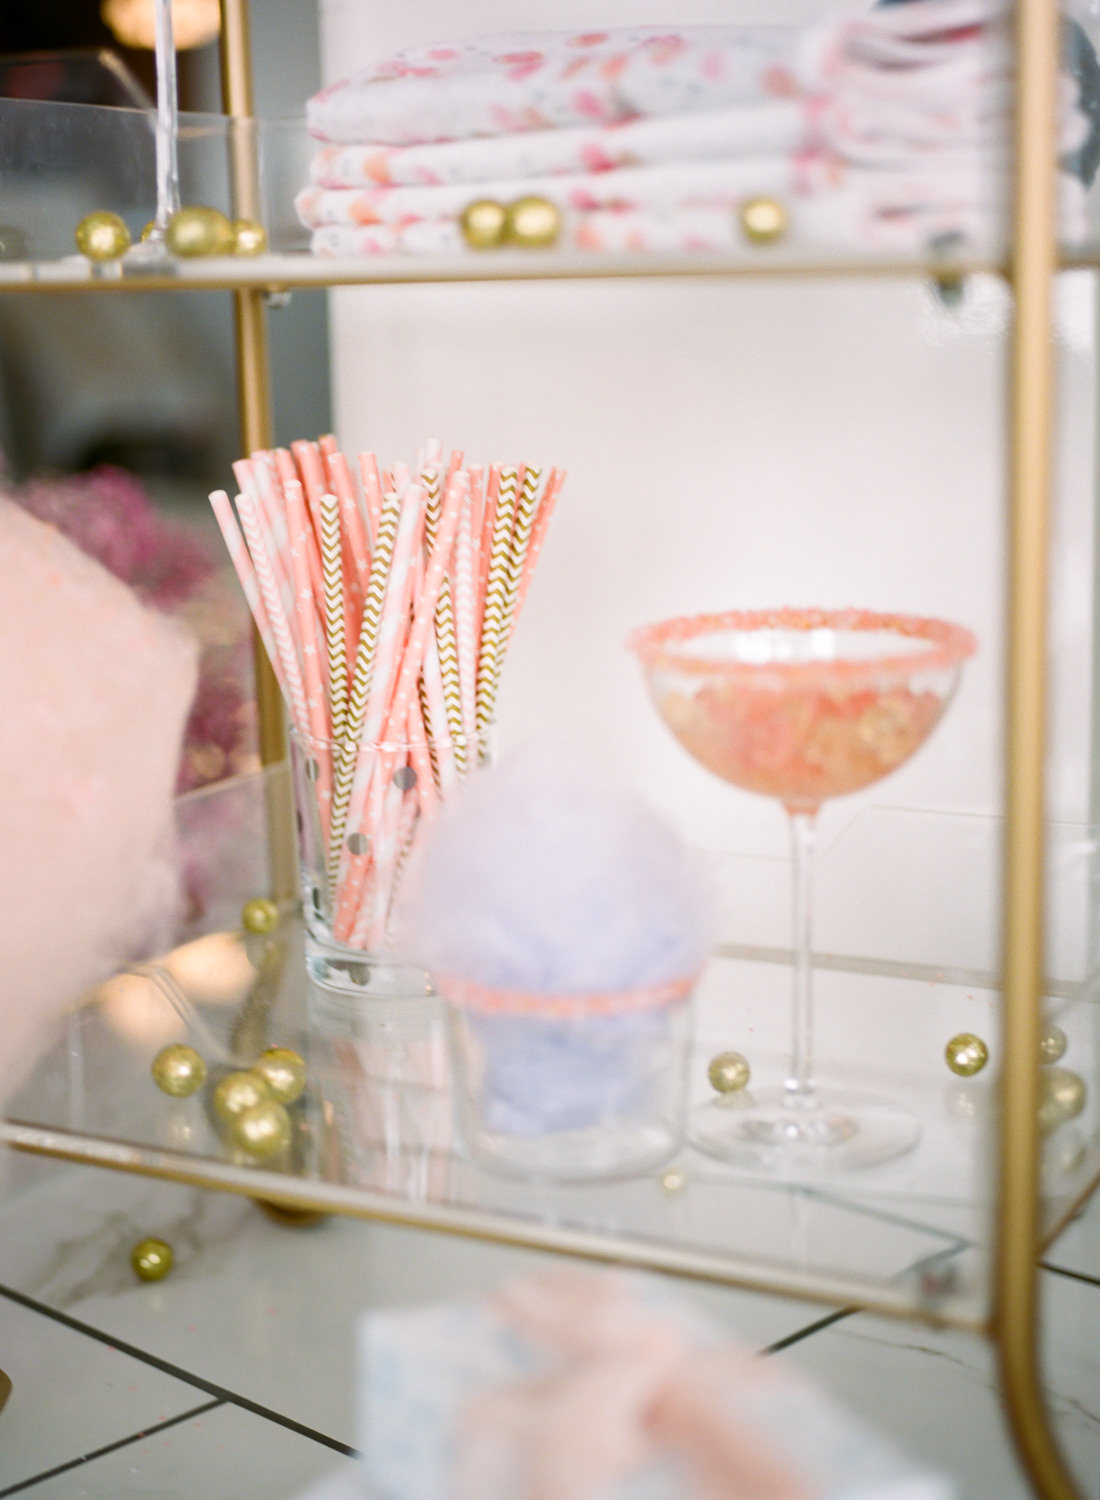 Sara Elizabeth Weddings, Lo in London, cotton candy and presents on Crate and Barrel bar cart, St. Louis wedding photographer